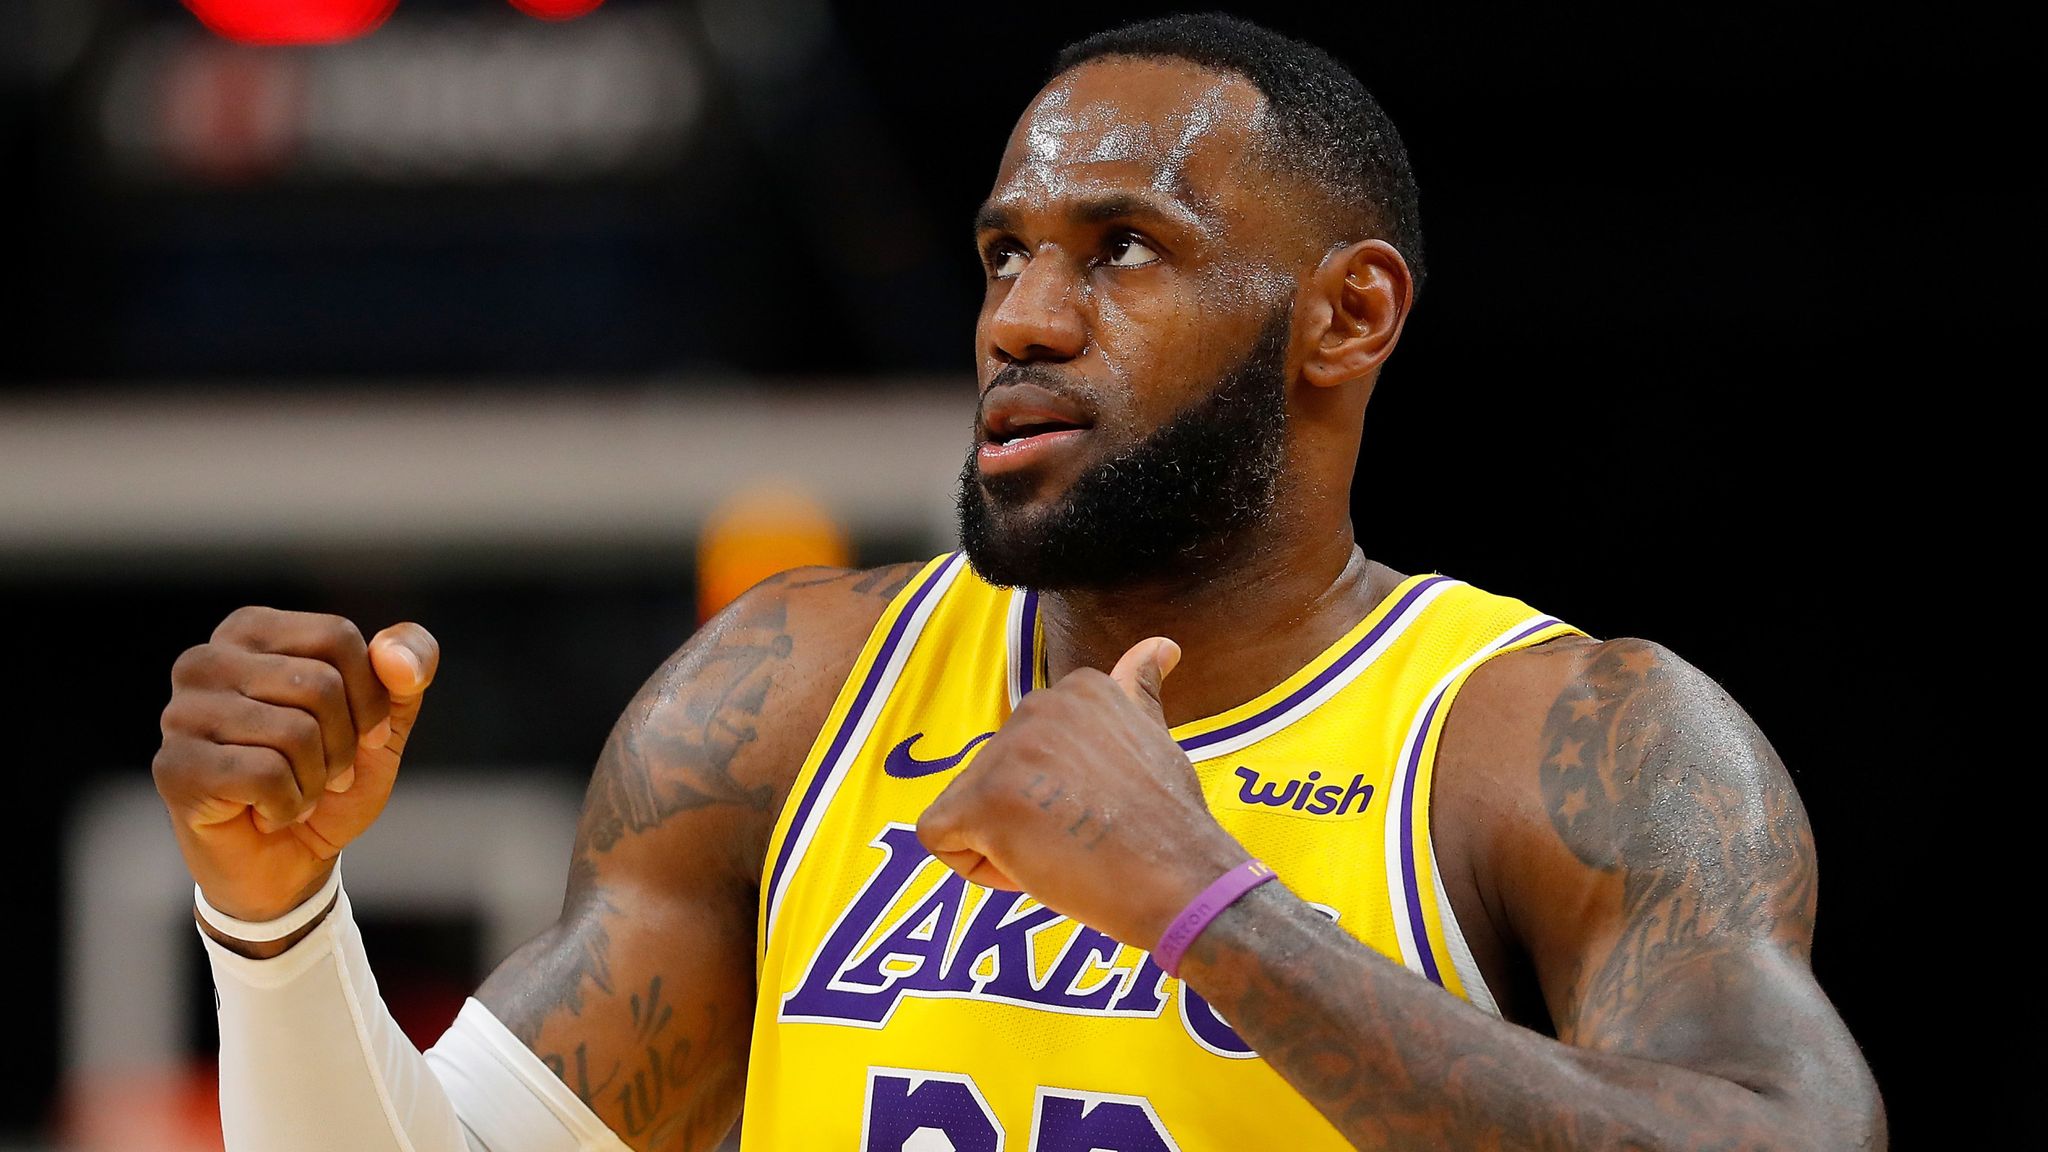 LeBron James, Lakers extend impressive streaks with most popular